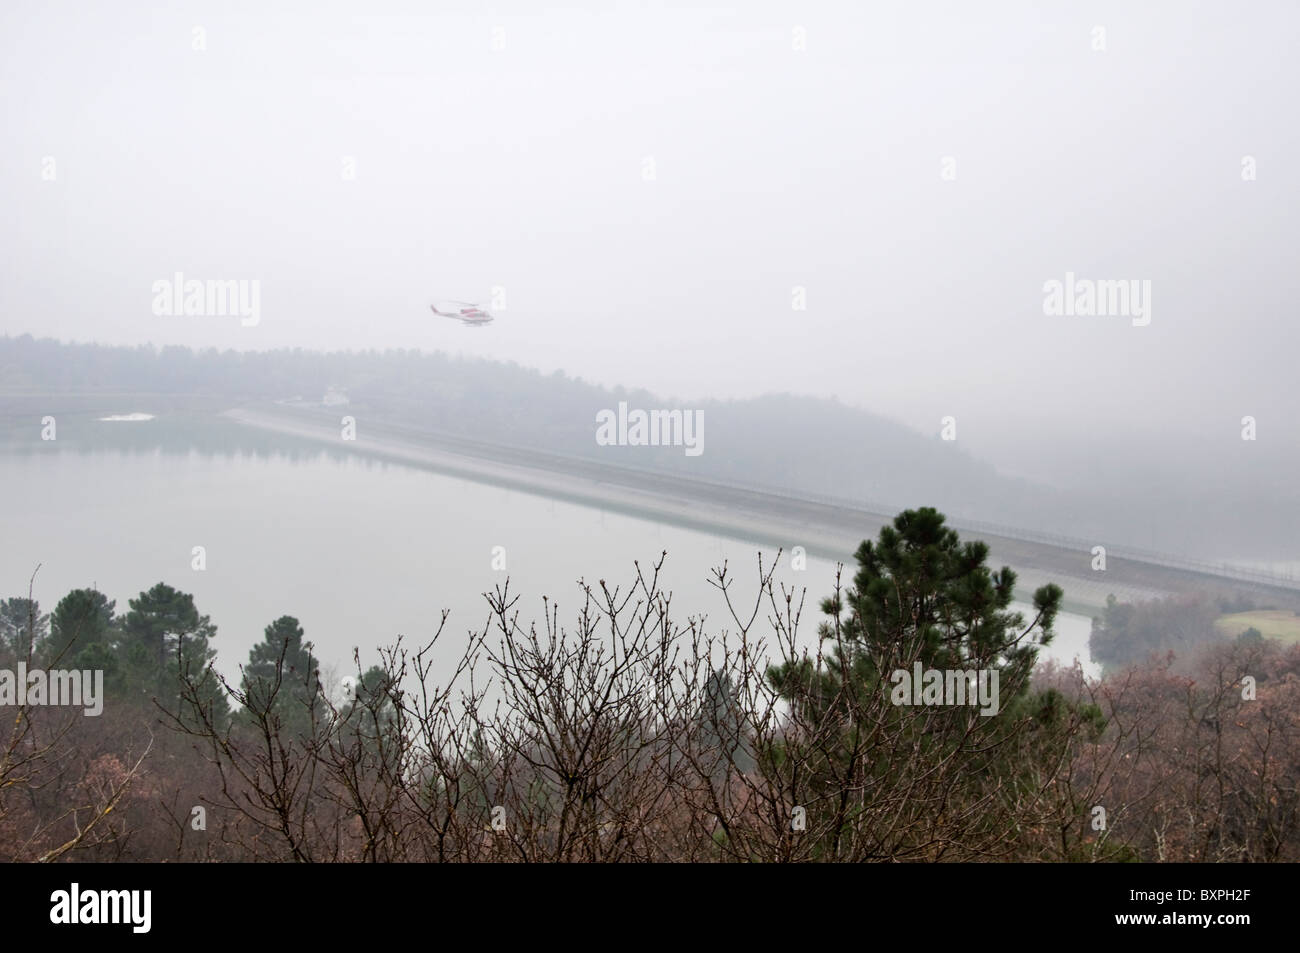 Helicopter in fog over Montedoglio Dam burst with a 30 metre gap in the wall, 29 Dec, 2010, near Sansepolcro. Stock Photo